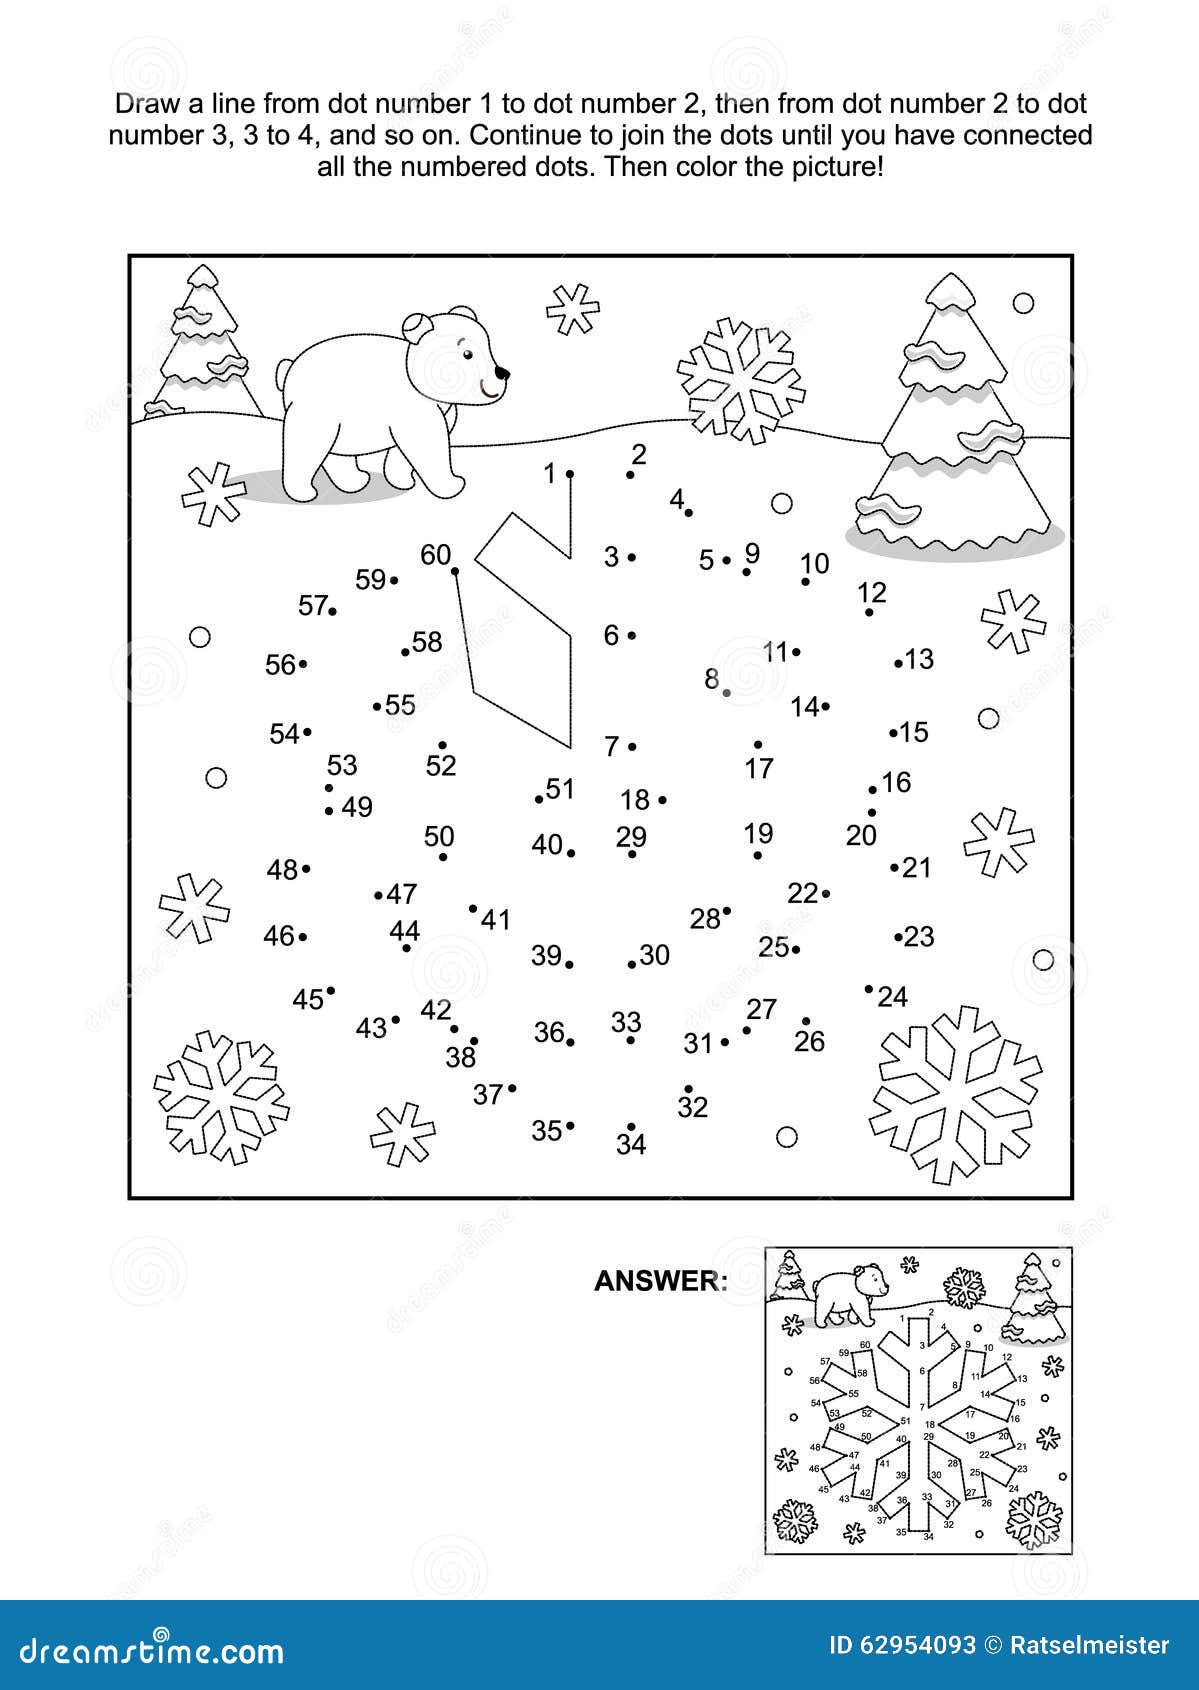 dottodot and coloring page  snowflake stock vector